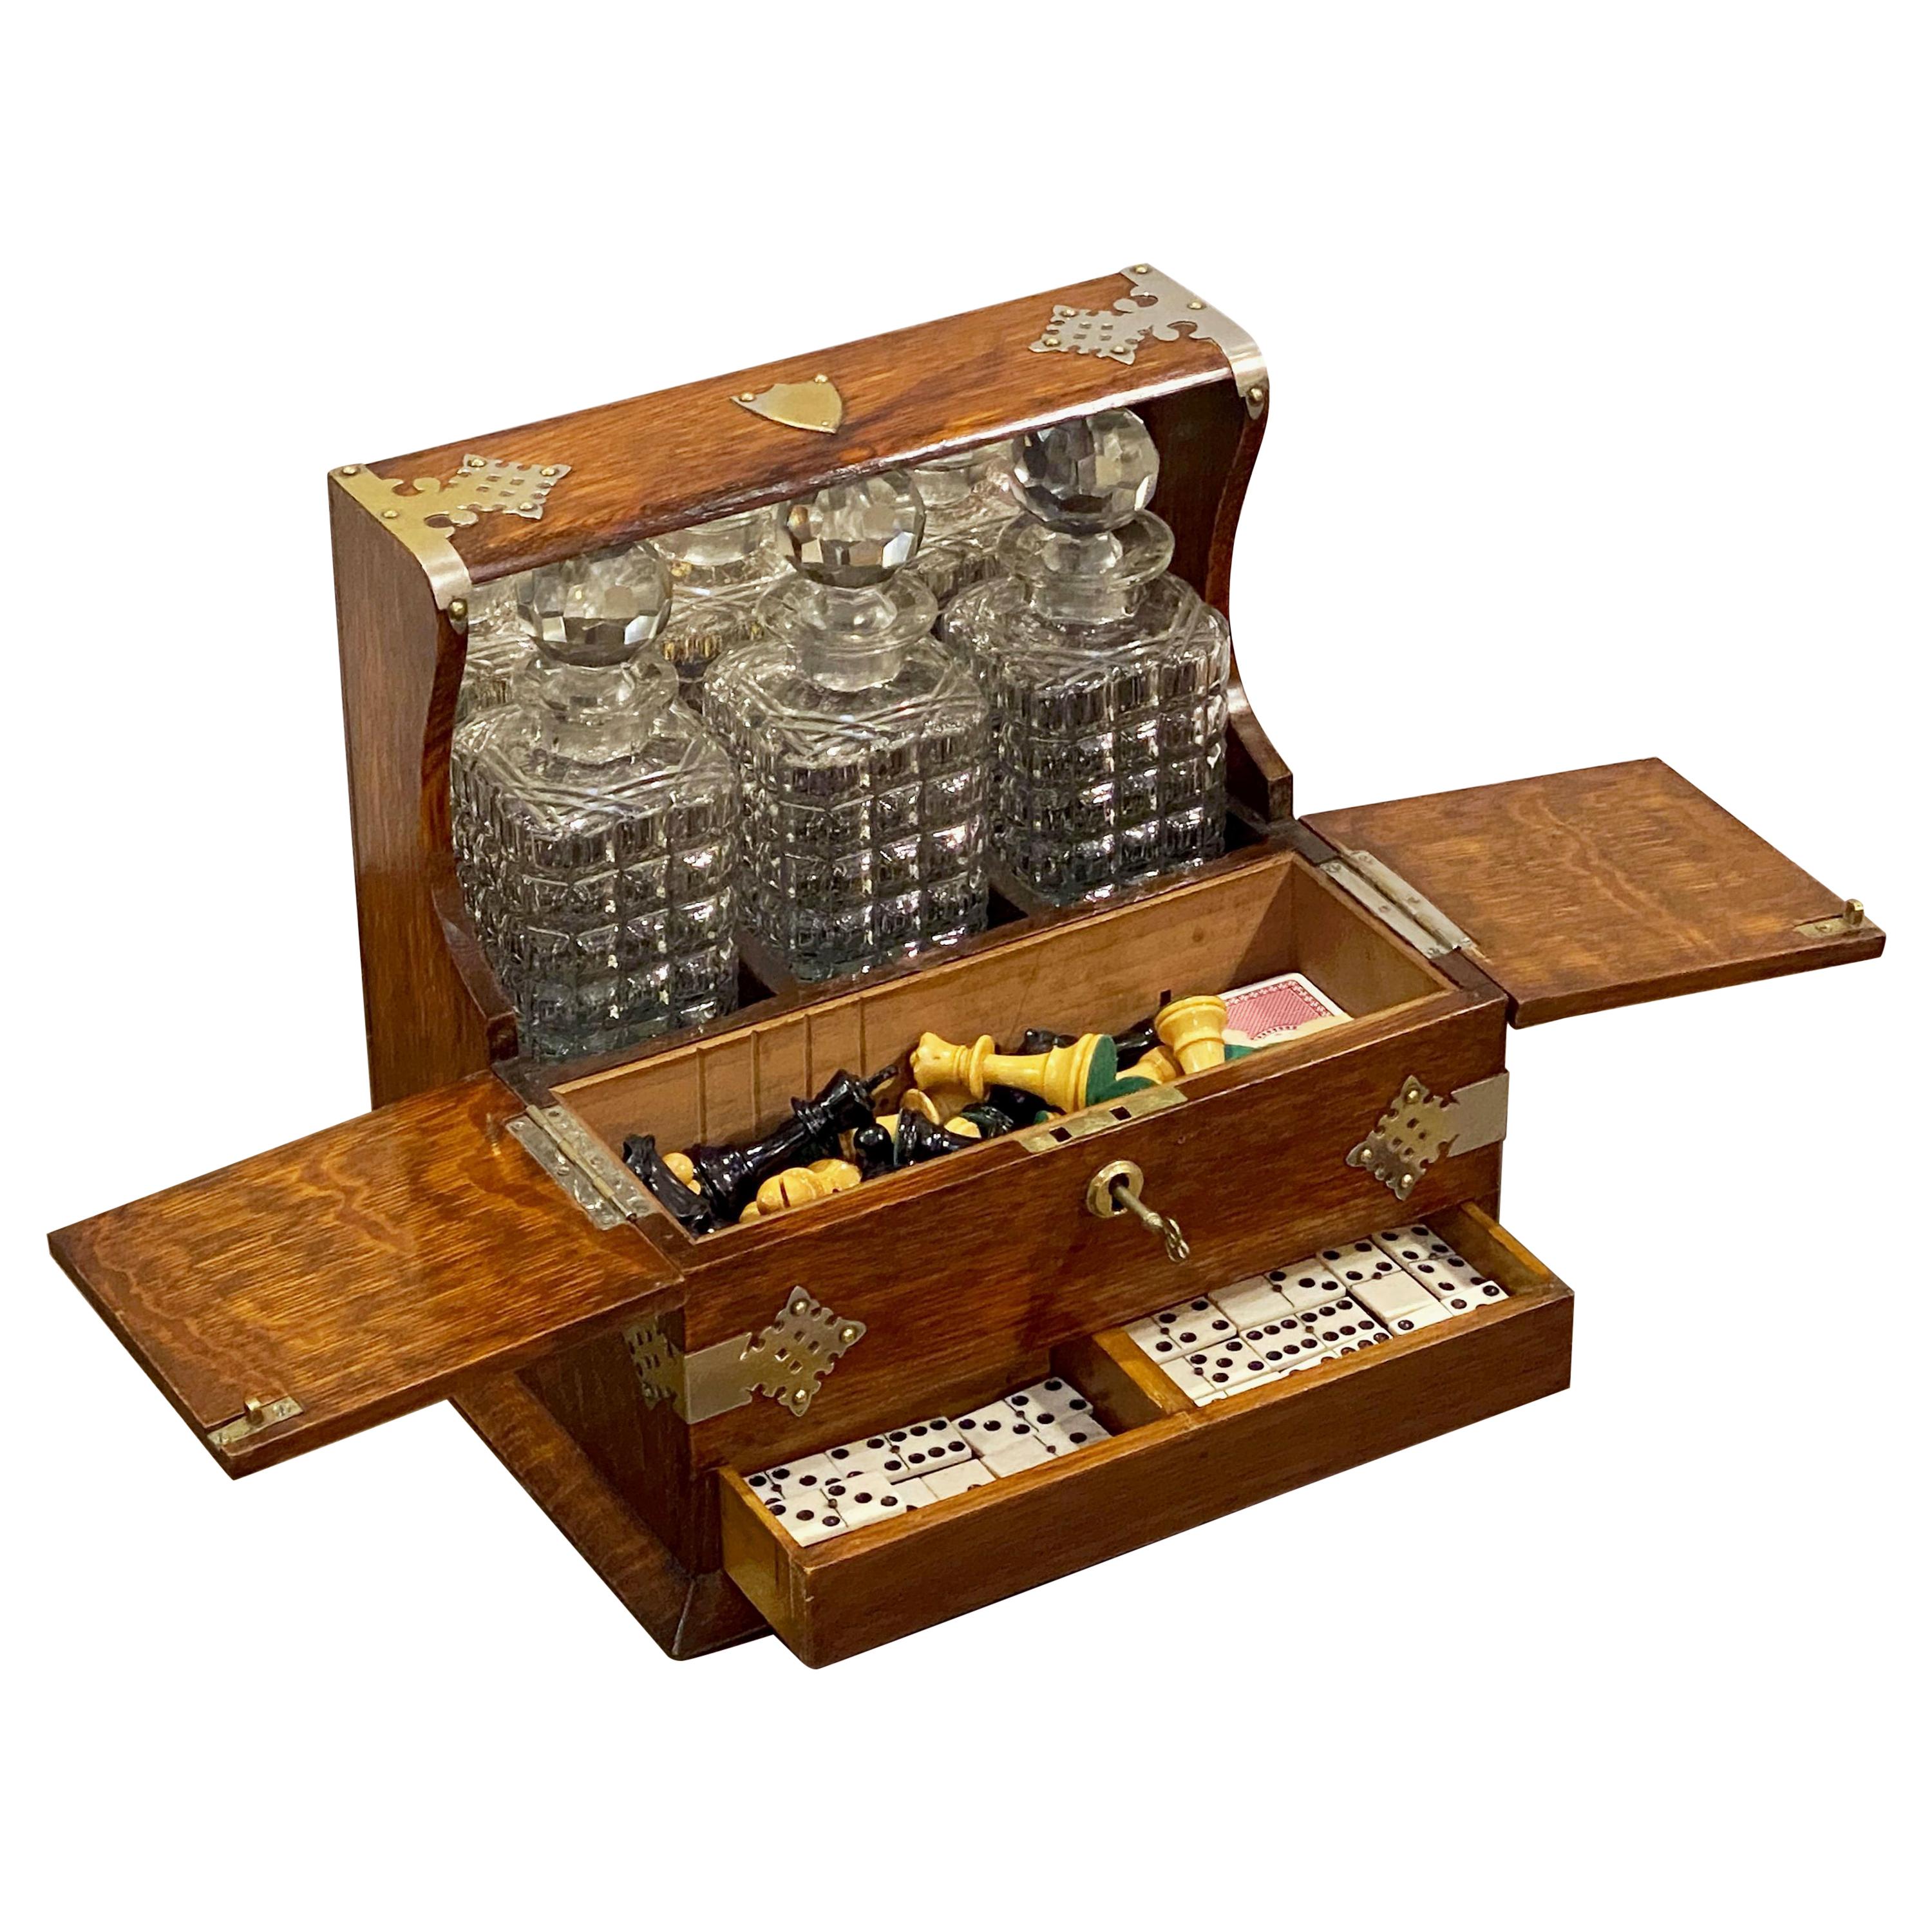 English Gaming Compendium and Tantalus of Oak with Three Decanters